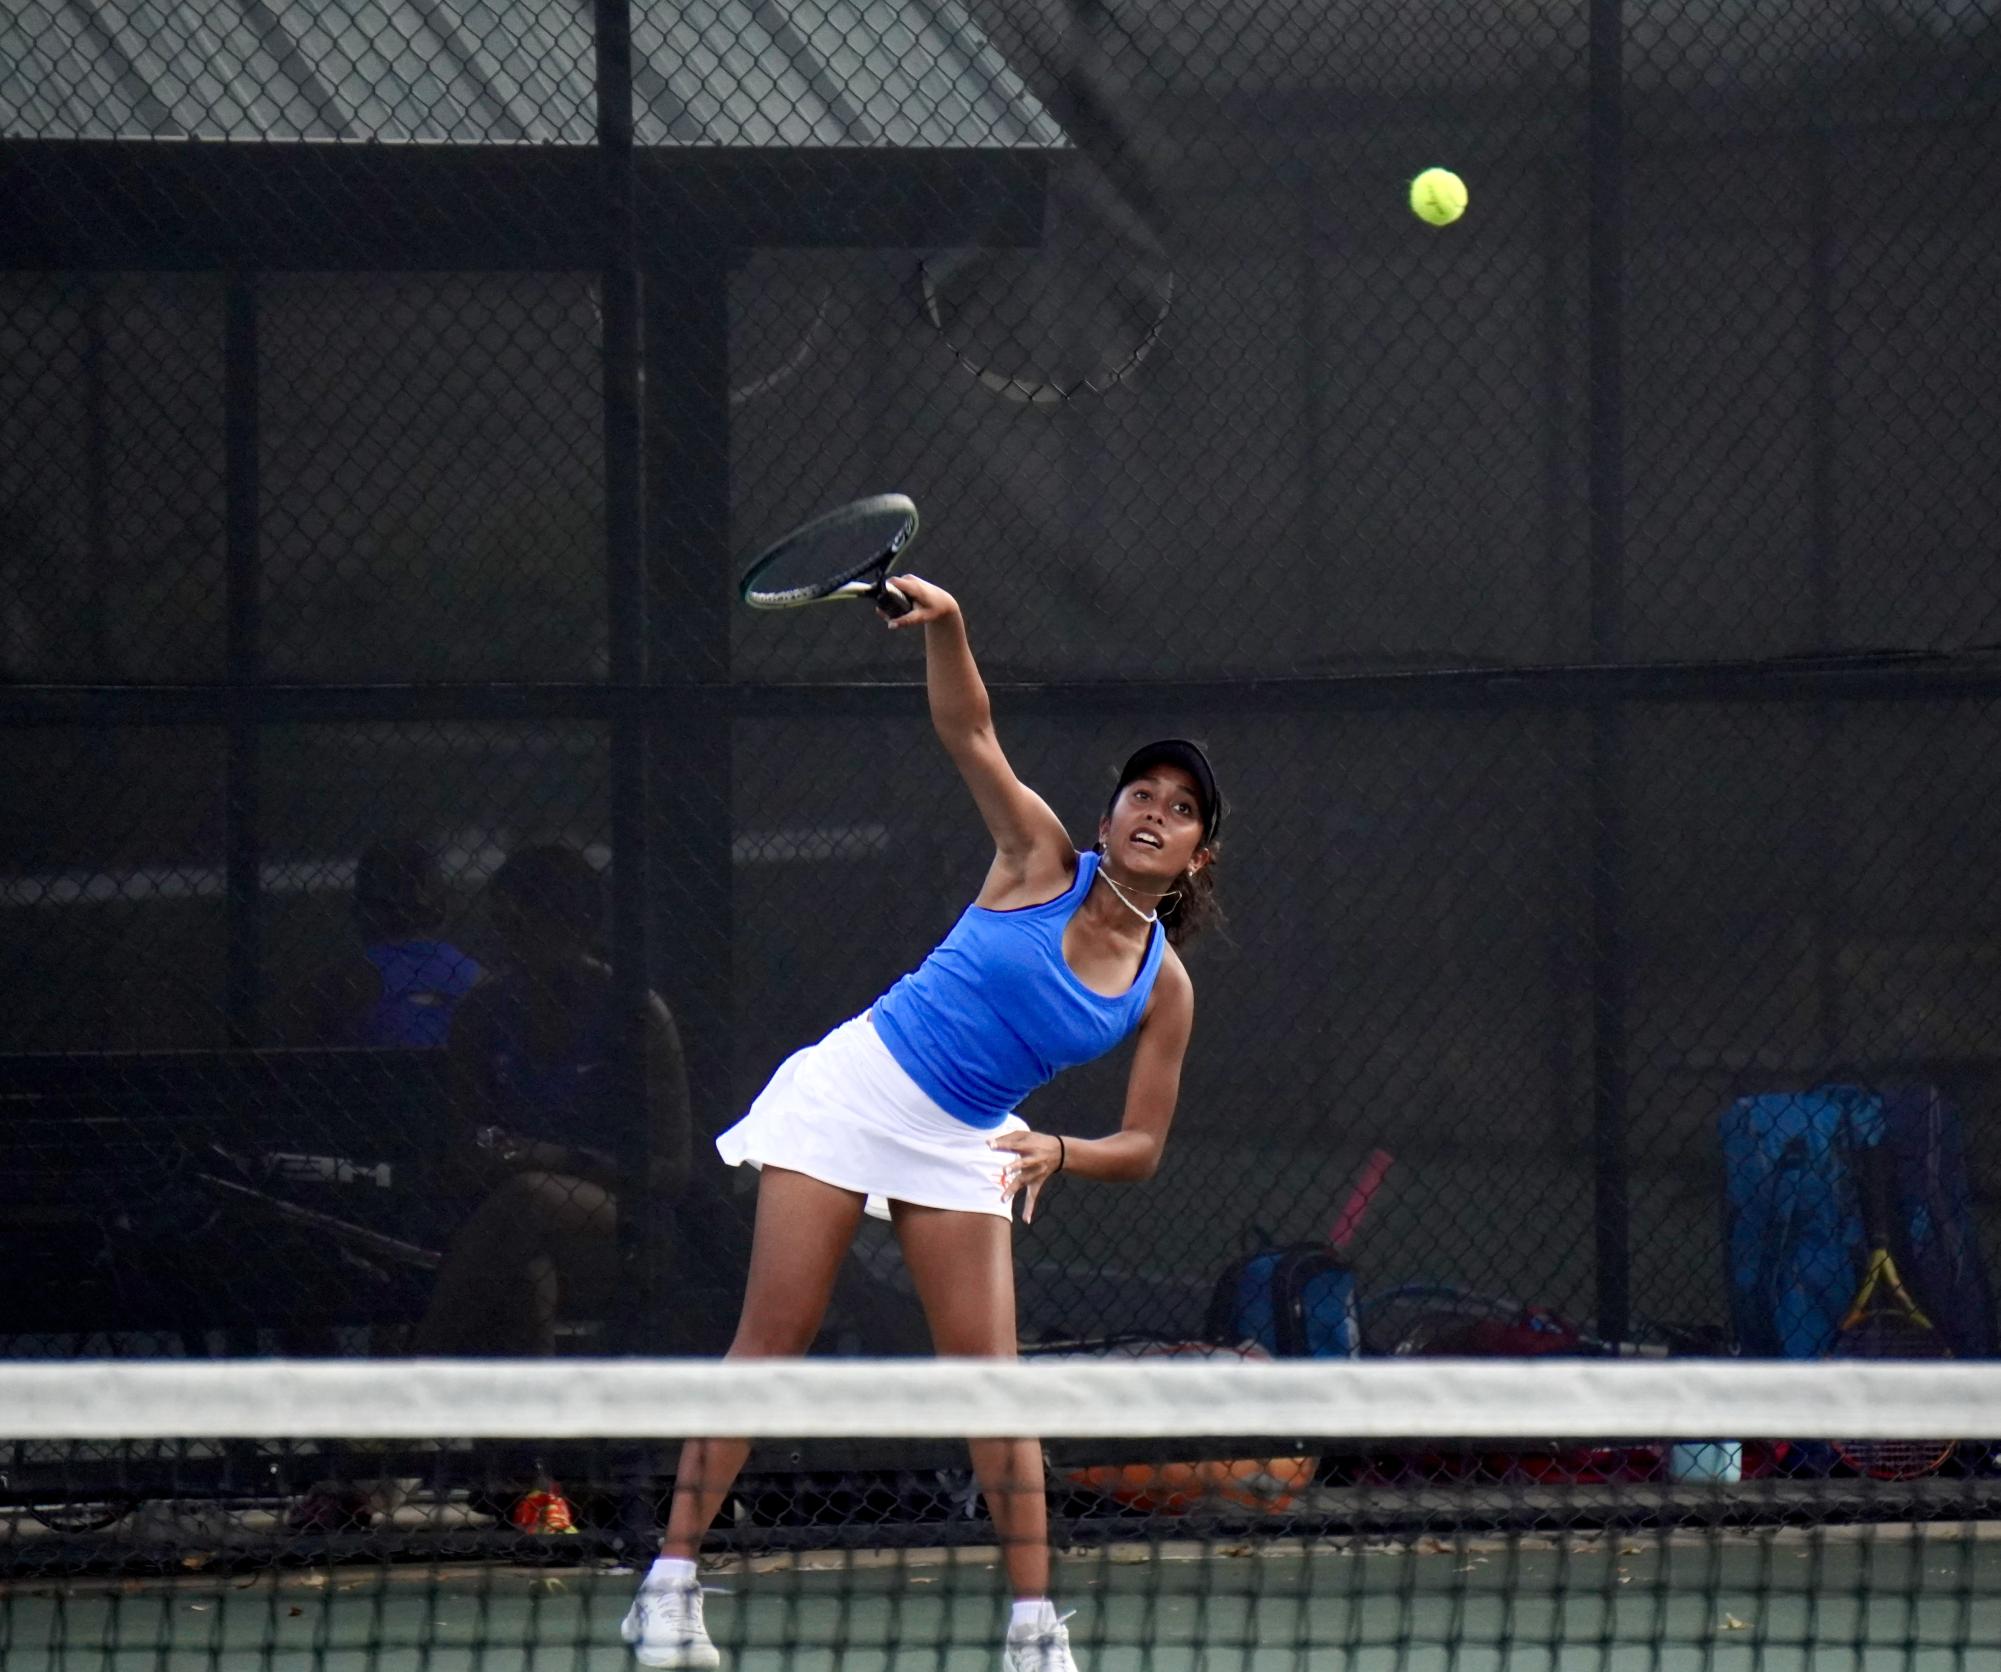 Senior Simone Sah serves the ball in a match on Sept. 21 against Ladue. This match prepared her for her eventual victory at state.